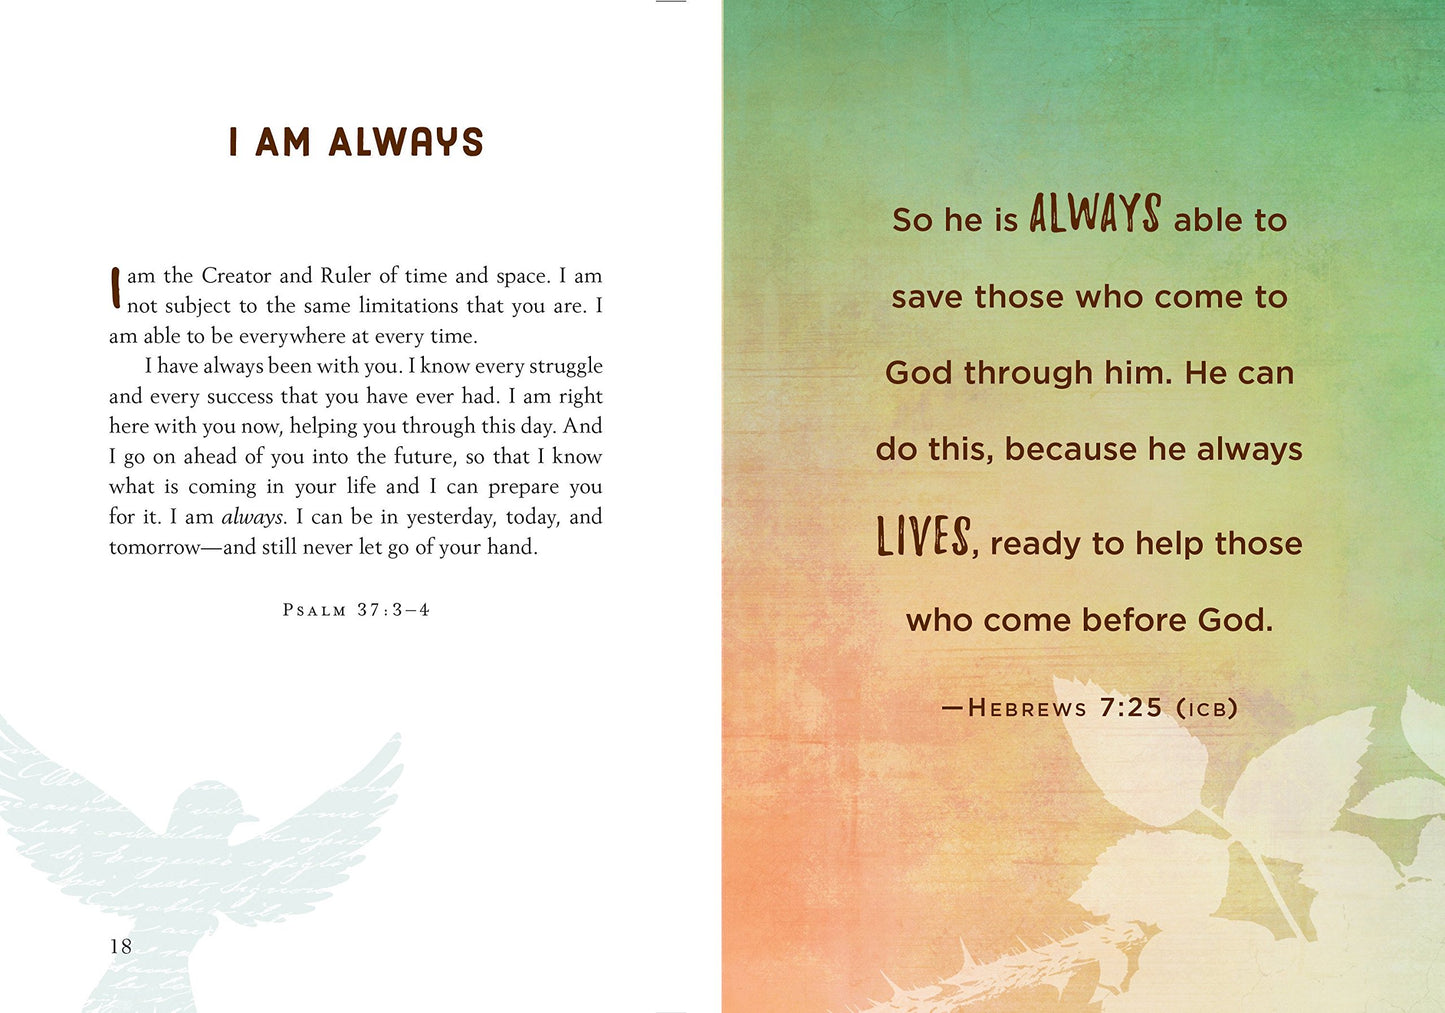 Jesus Calling For Teens - 50 Devotions For Busy Days